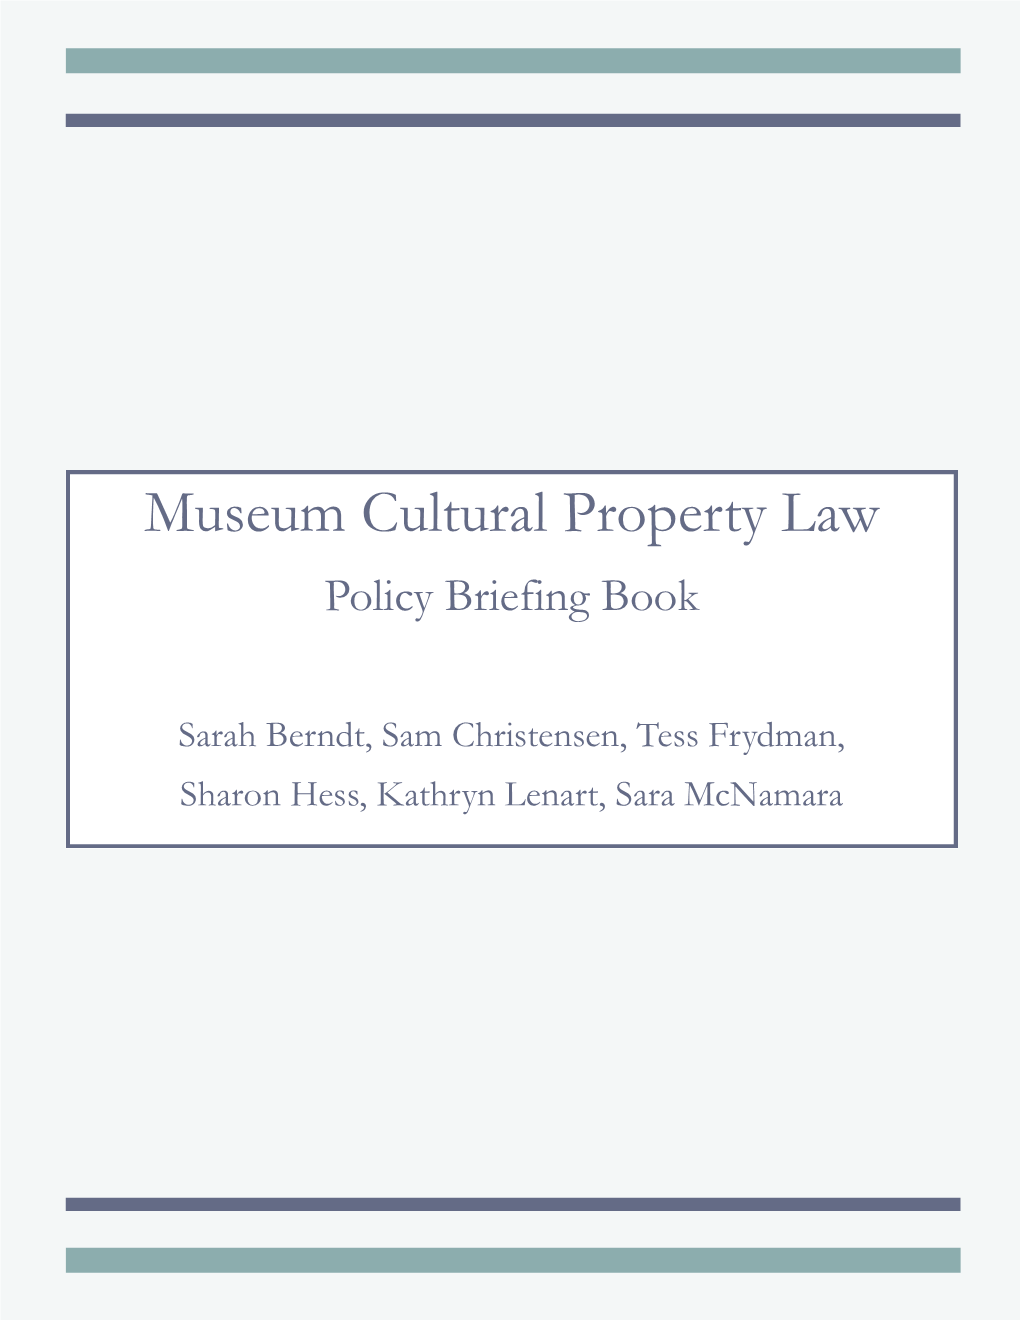 Museum Cultural Property Law Policy Briefing Book